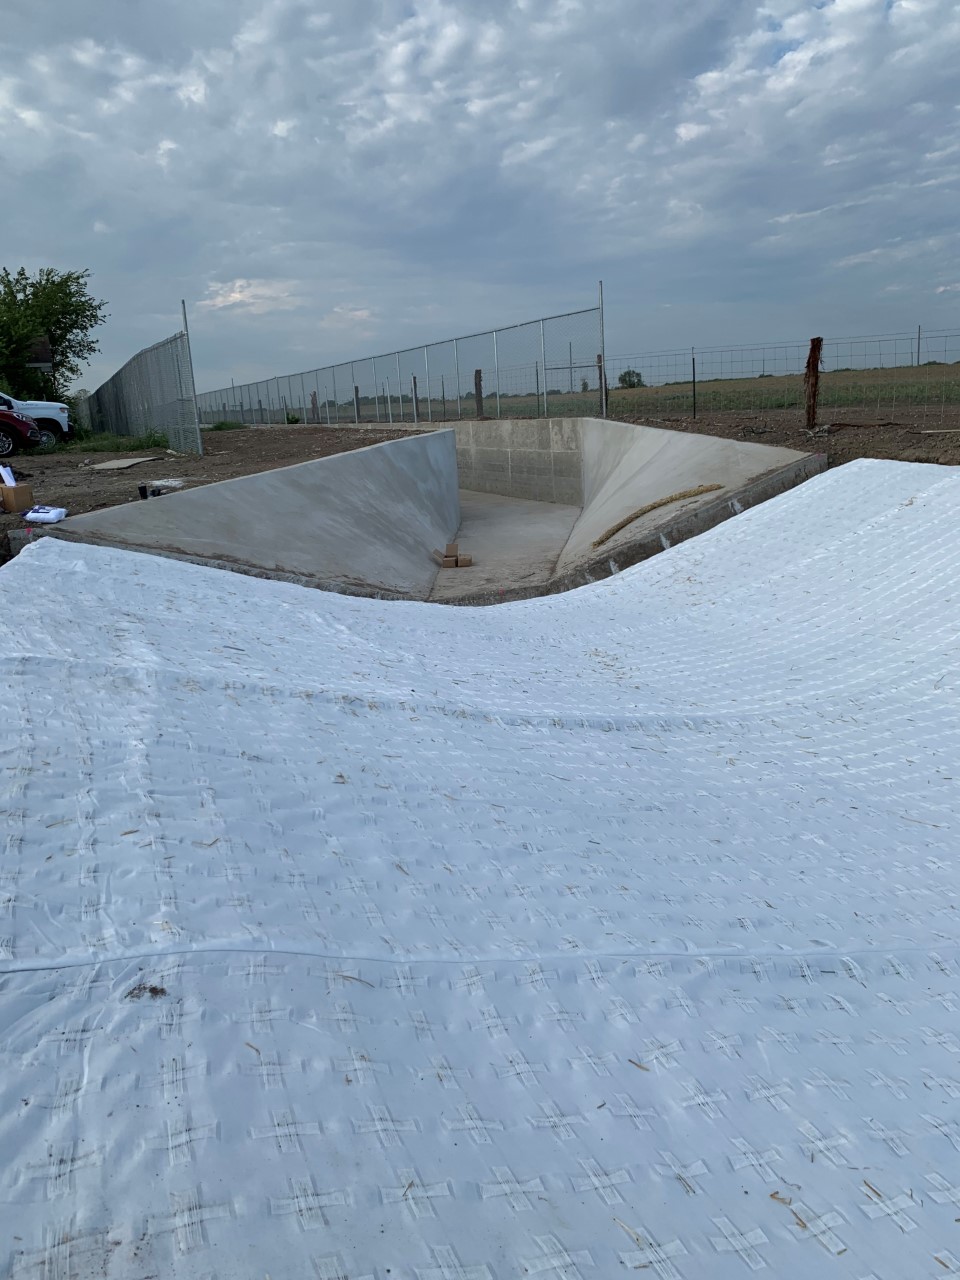 hydrotex product for runway protection